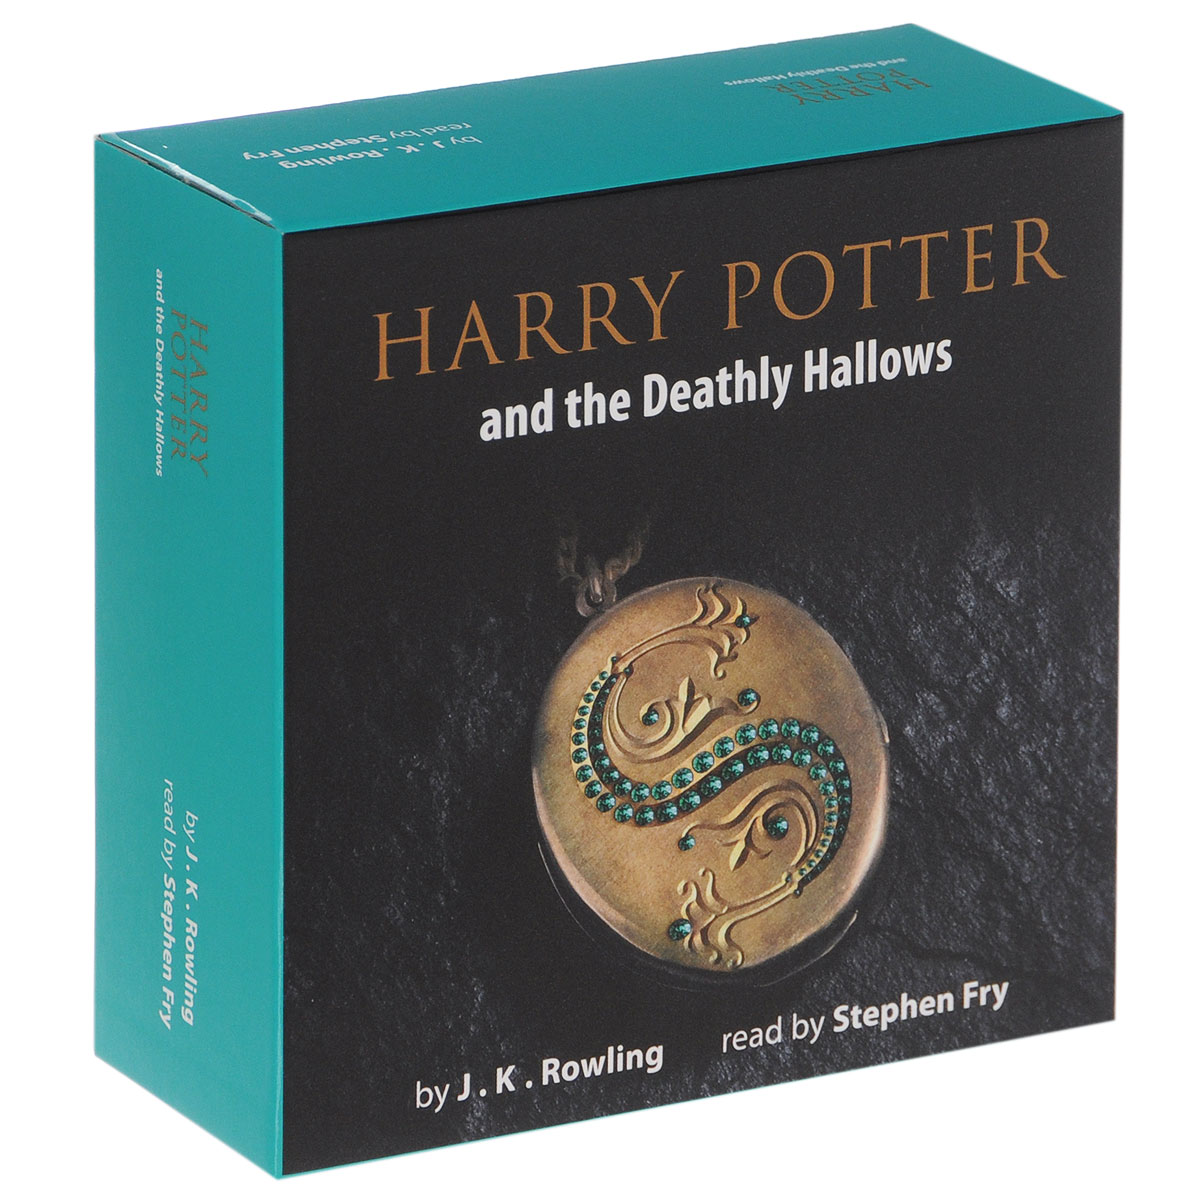 harry potter and the deathly hallows audiobook tracklist